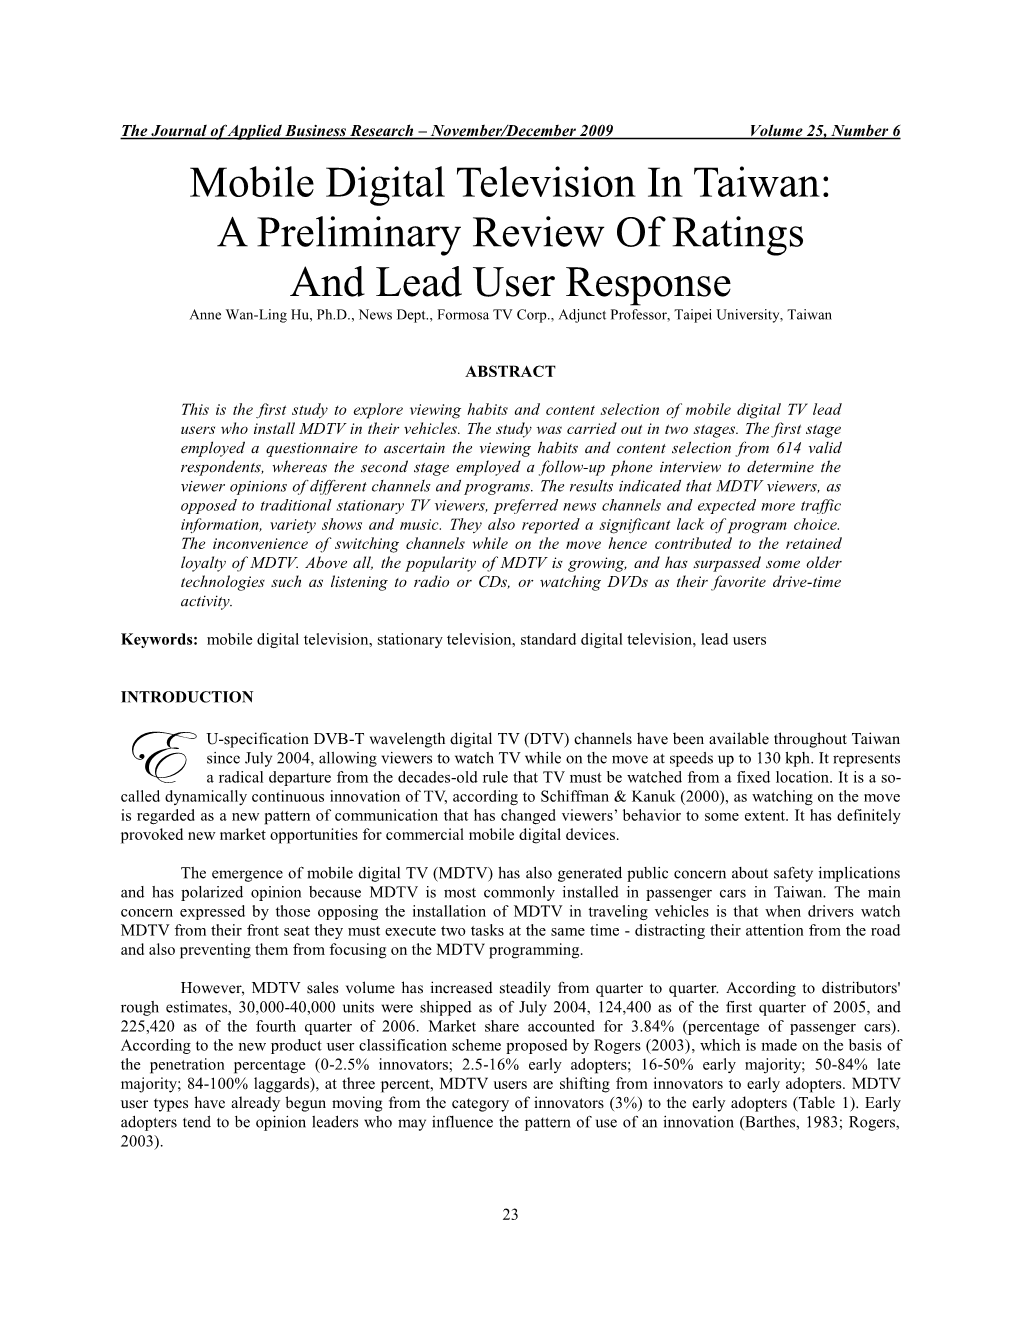 Mobile Digital Television in Taiwan